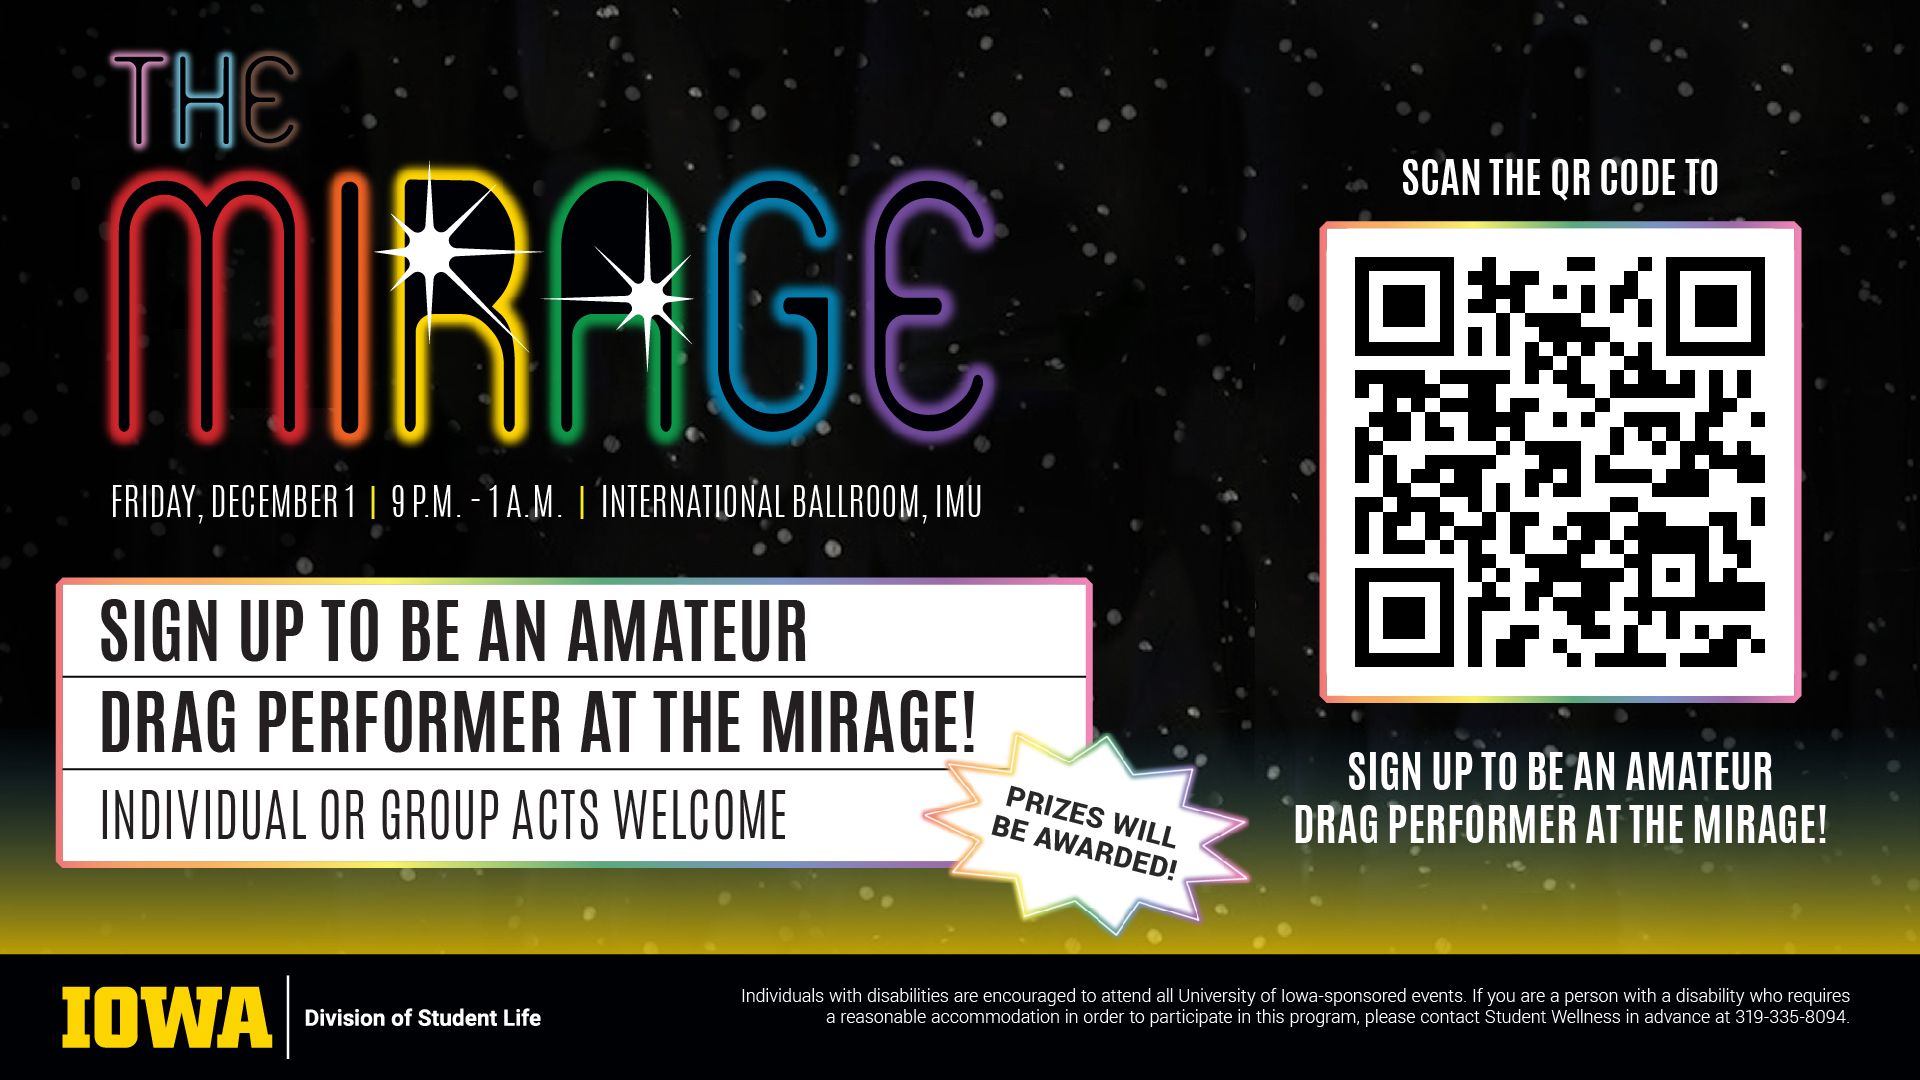 The Mirage: Sign up to be an amateur drag performer at The Mirage on Friday, December 1 at 9 p.m.; Individual or group acts welcome